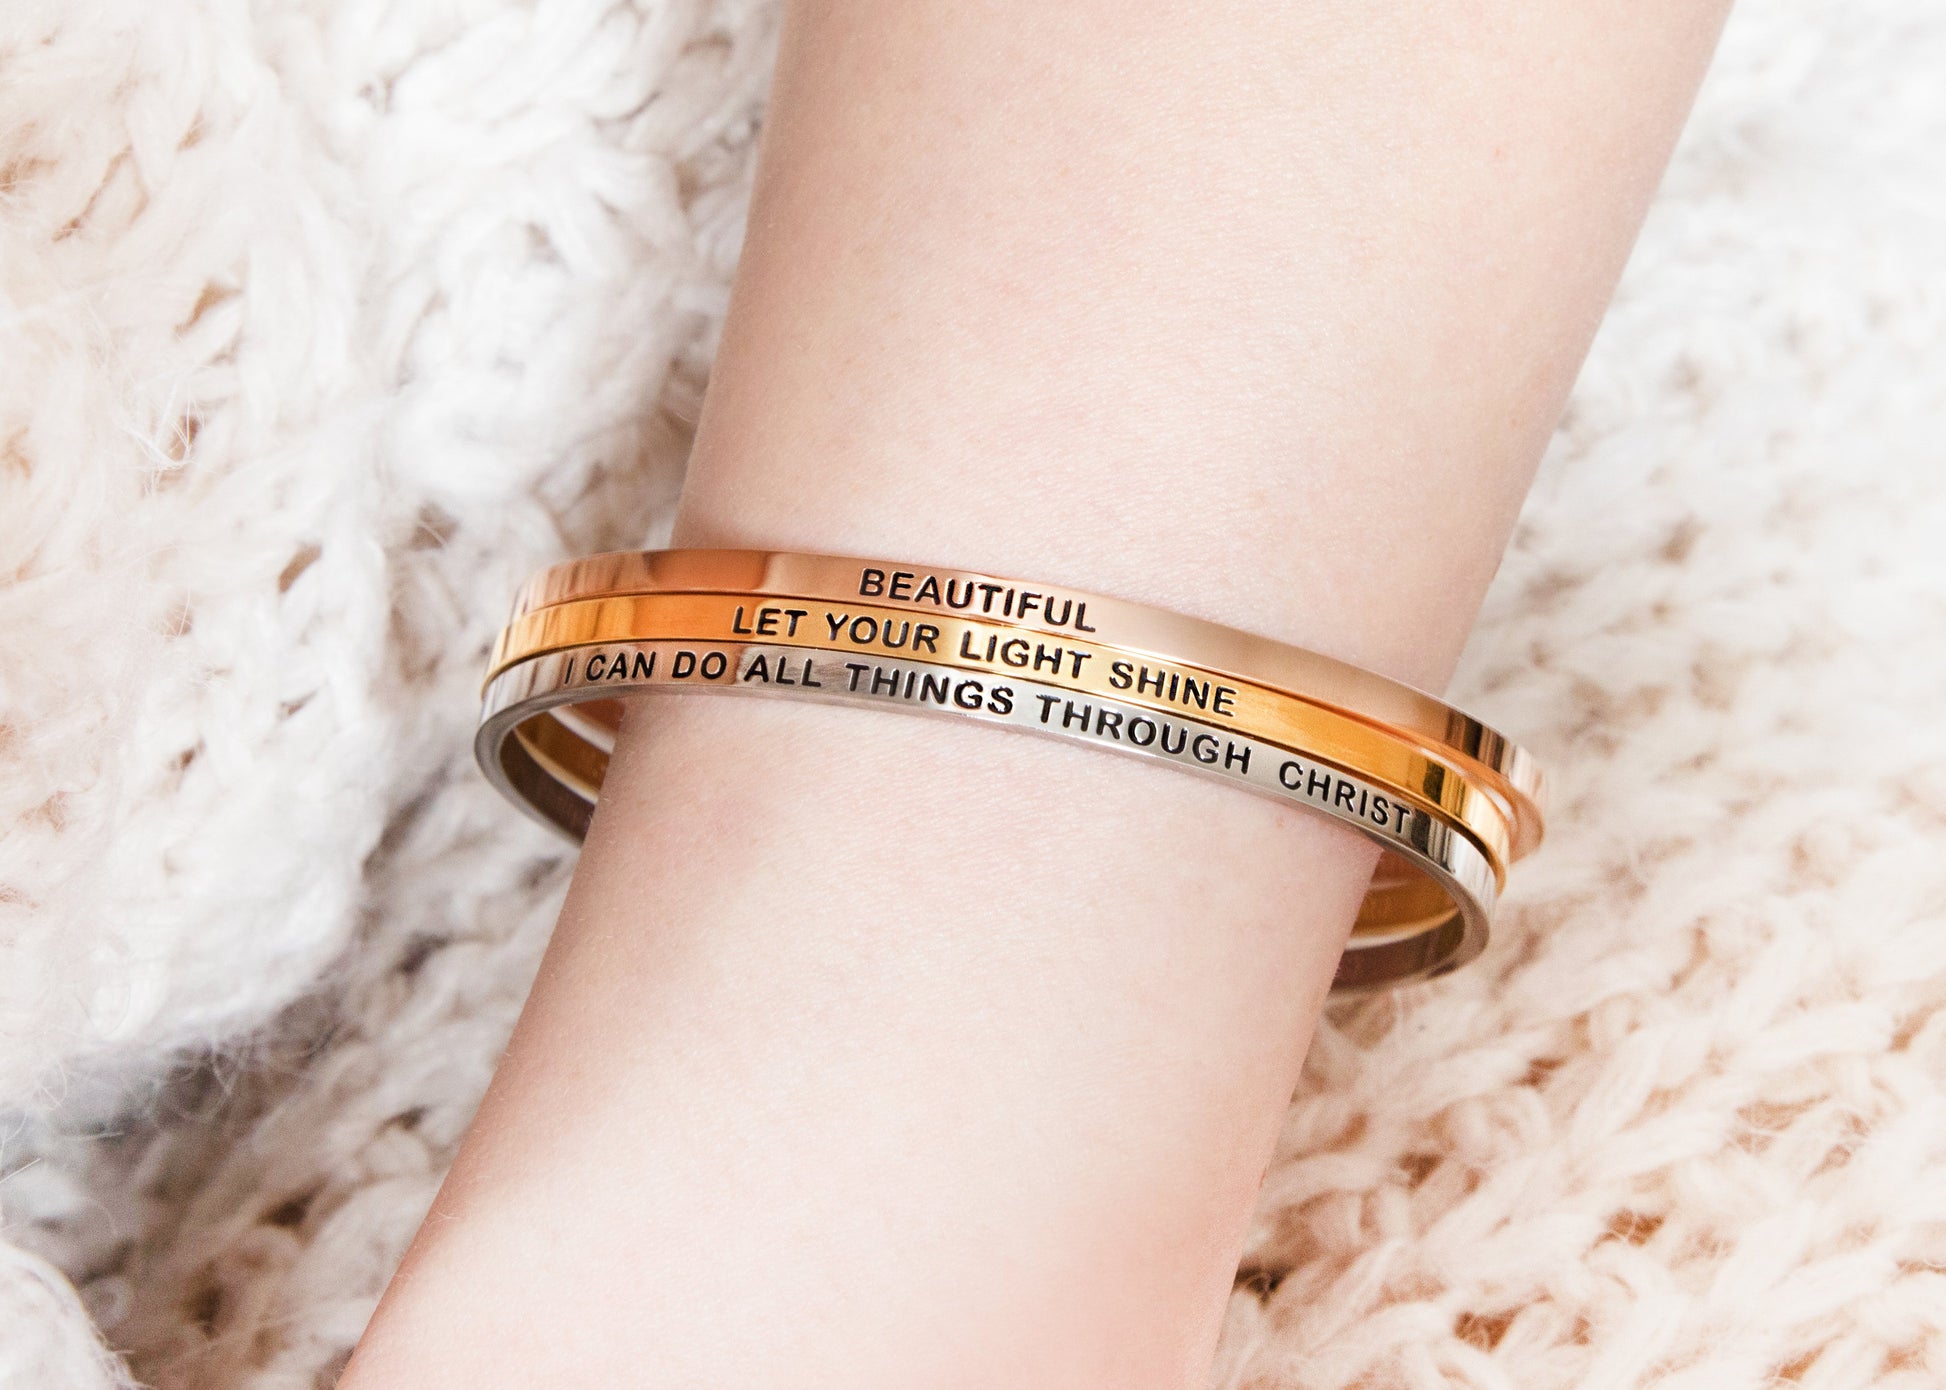 GOD IS WITHIN HER SHE WILL NOT FALL - NCOURAGE Bands and Bracelets